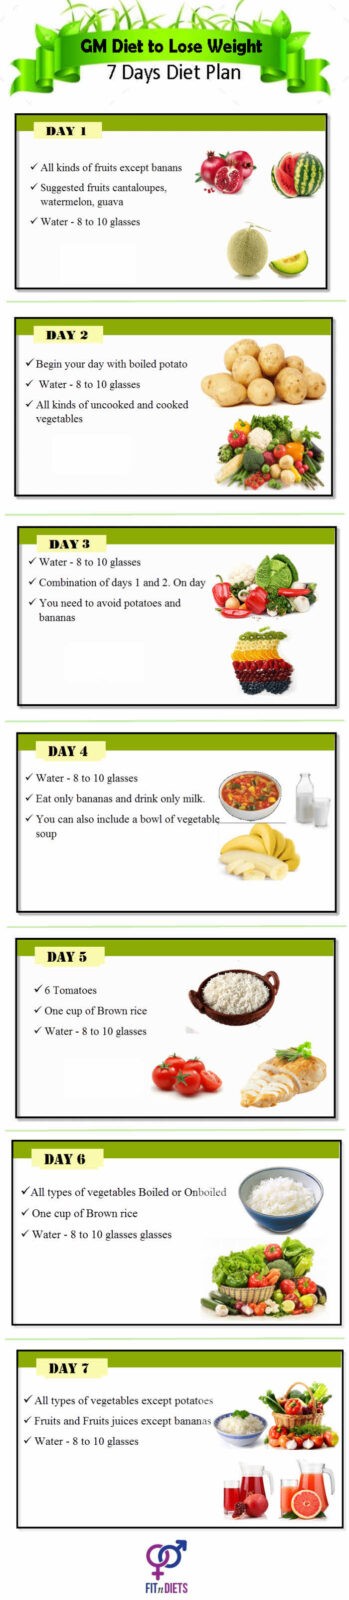 gm-diet-7days-weight-loss-infographic